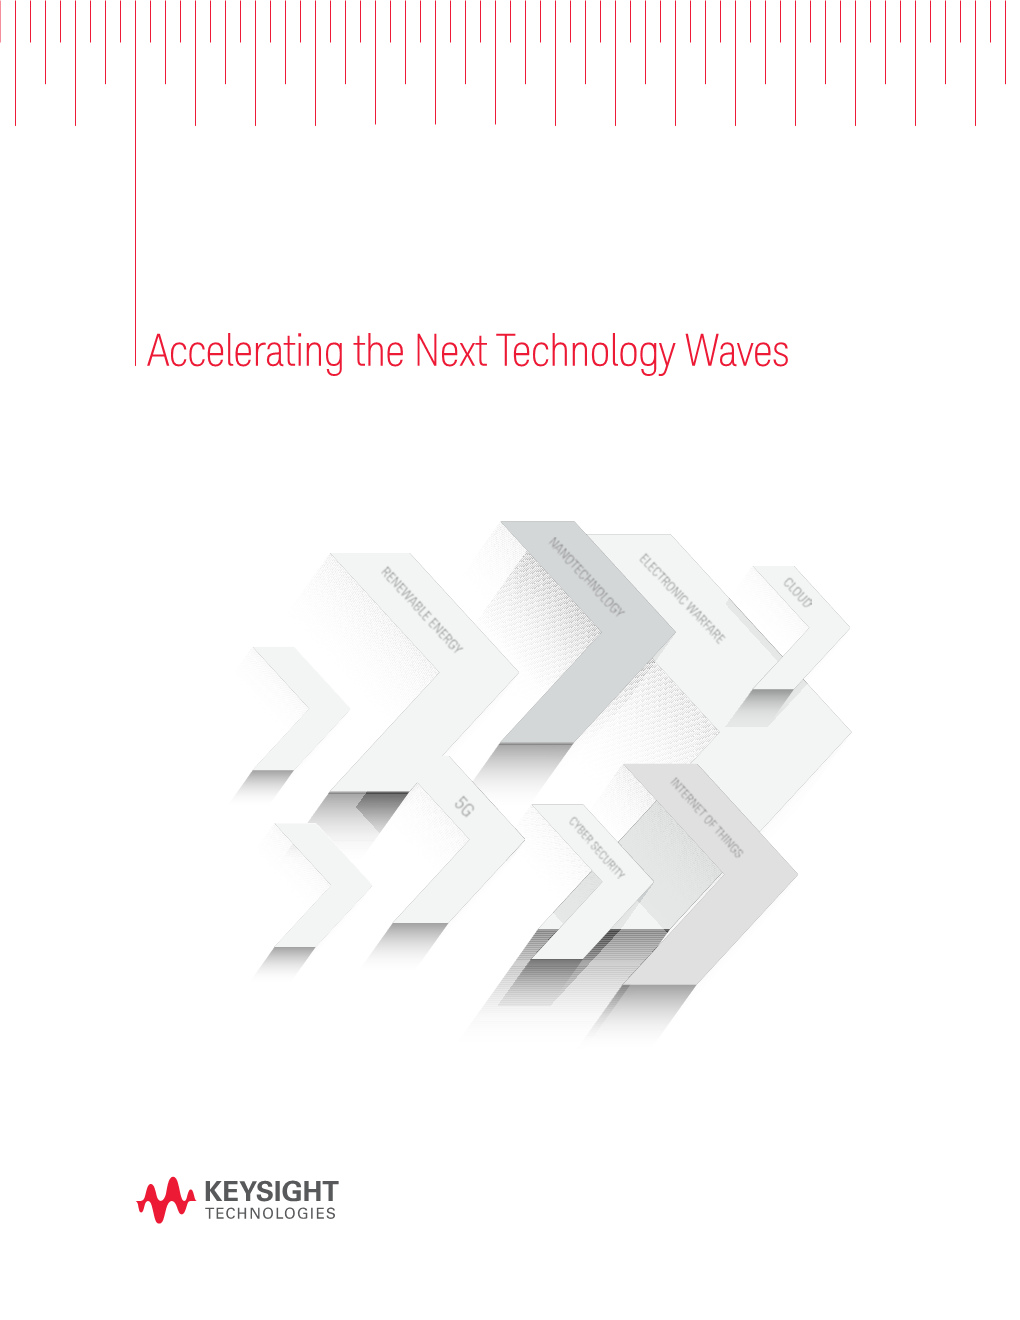 Accelerating the Next Technology Waves